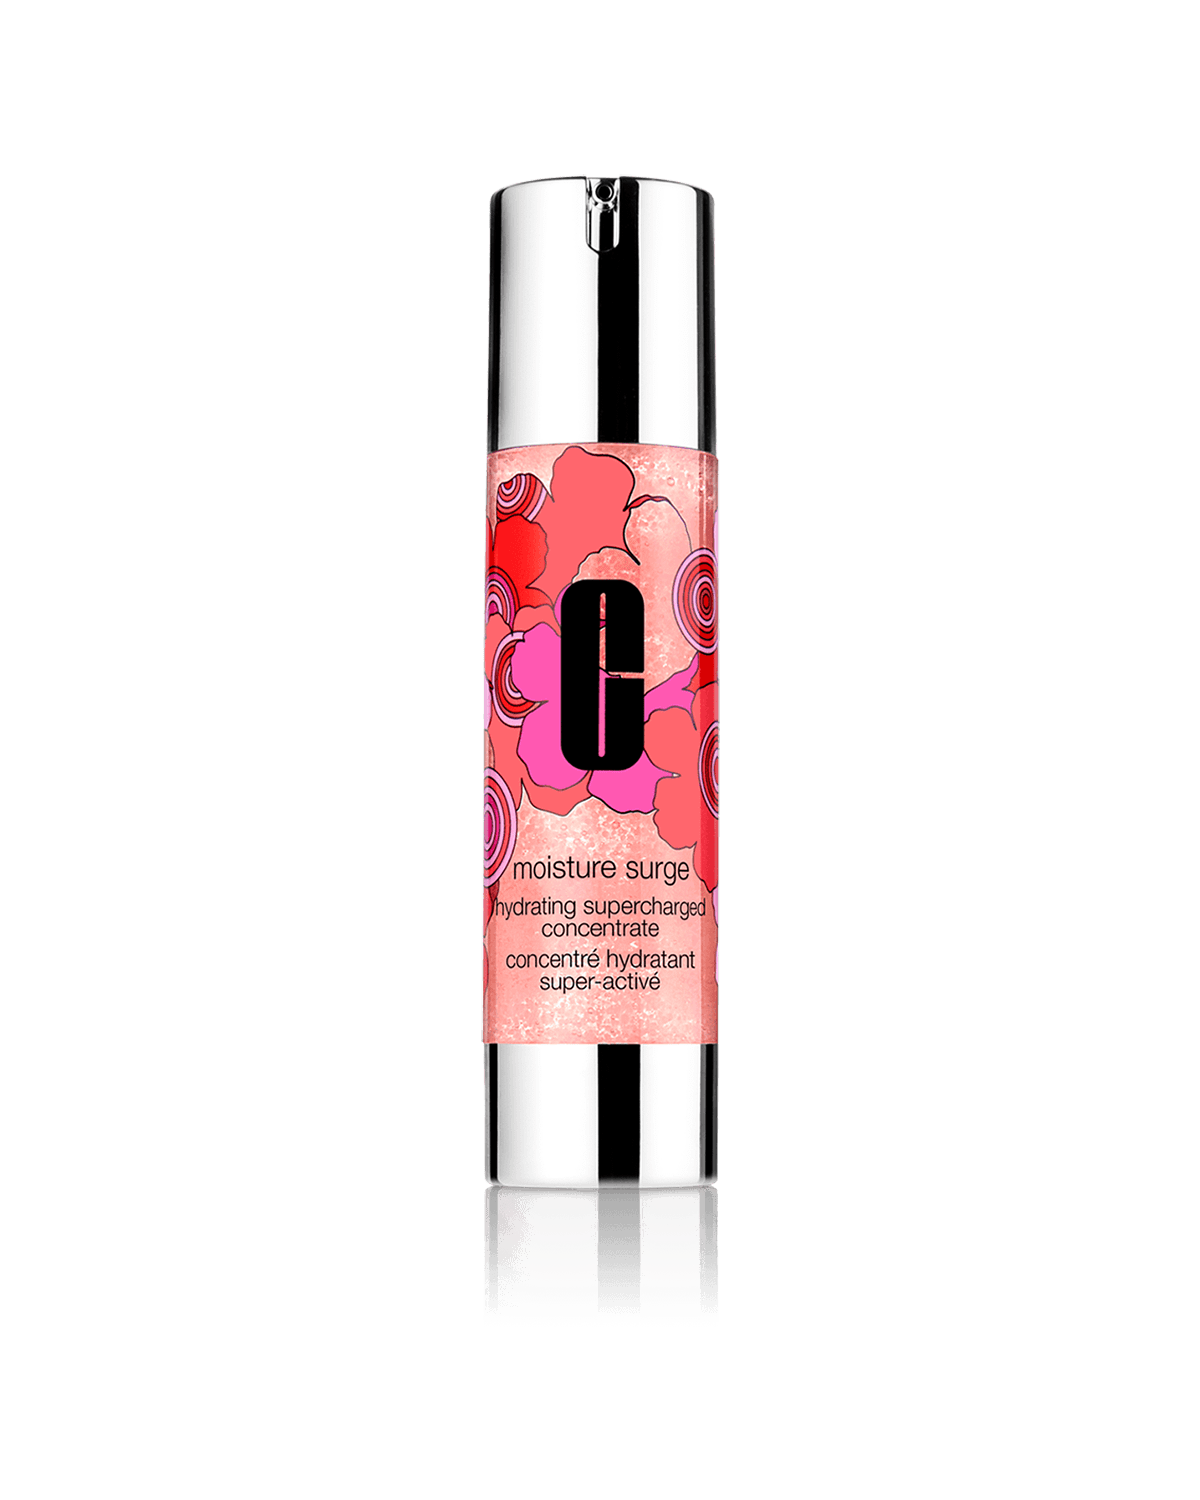 Limited Edition Moisture Surge Hydrating Supercharged Concentrate